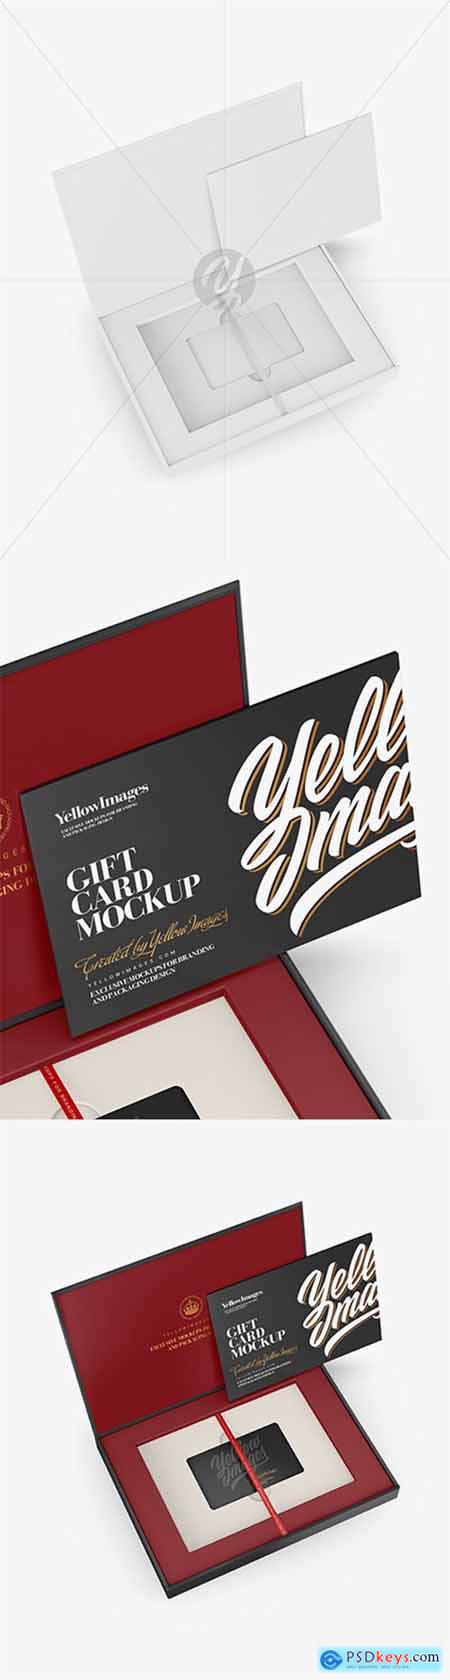 Download Gift Card In A Box Mockup Halfside View High Angle Shot 23539 Free Download Photoshop Vector Stock Image Via Torrent Zippyshare From Psdkeys Com